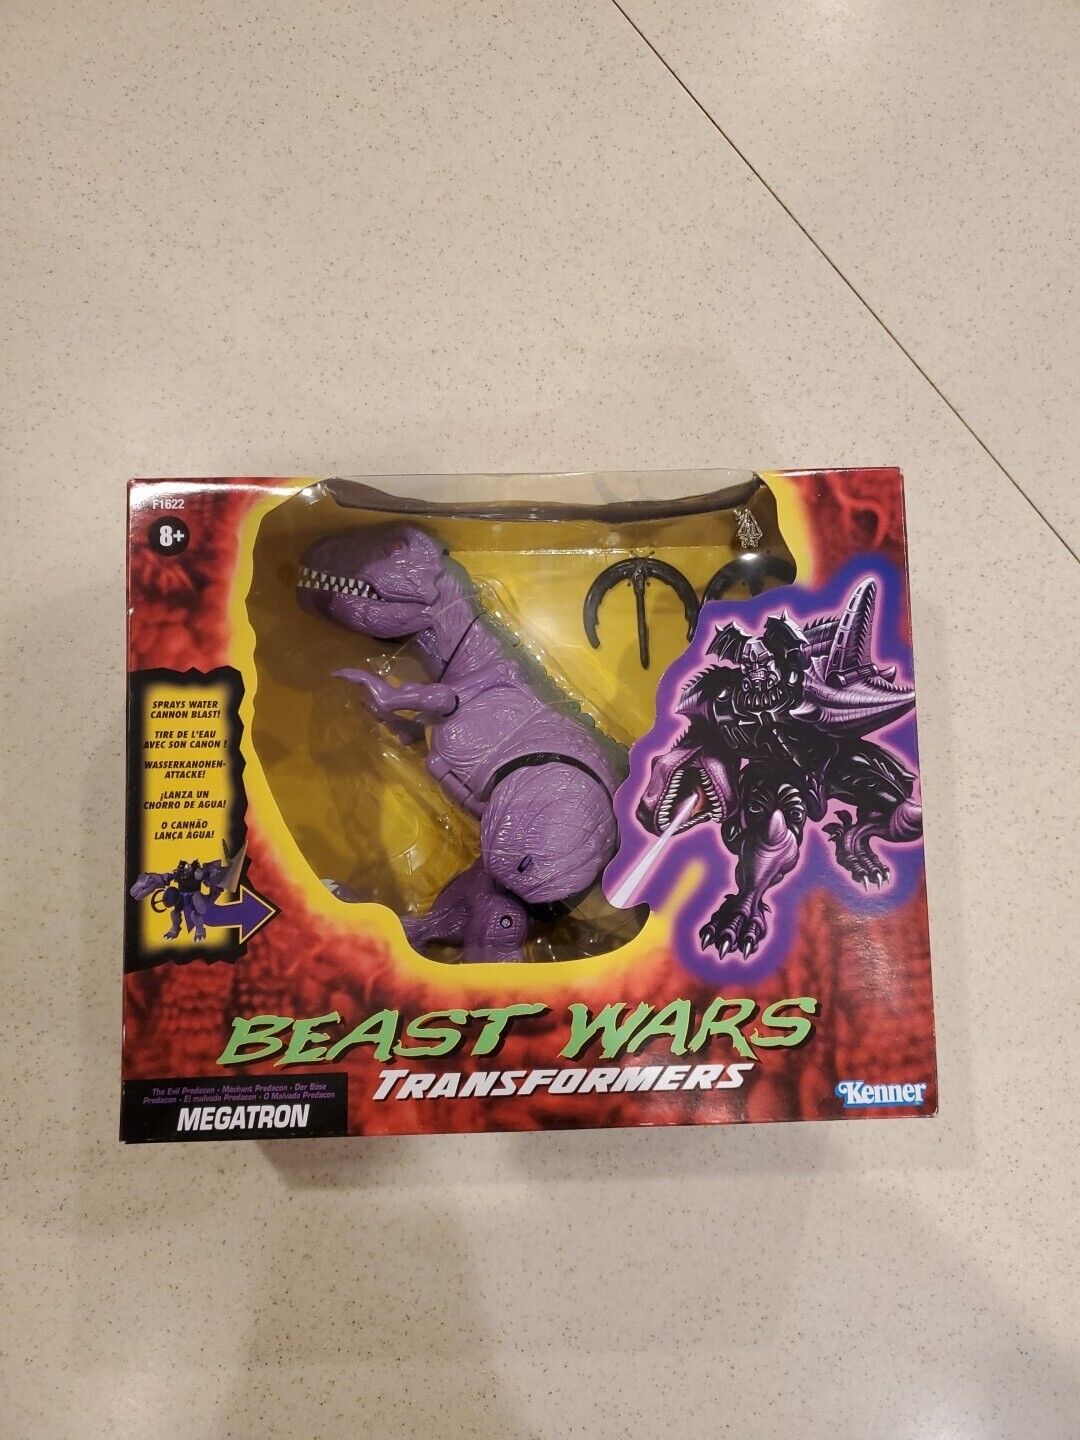 2021 Transformers Beast Wars Megatron Walmart Exclusive New Factory Sealed Kenner F1622